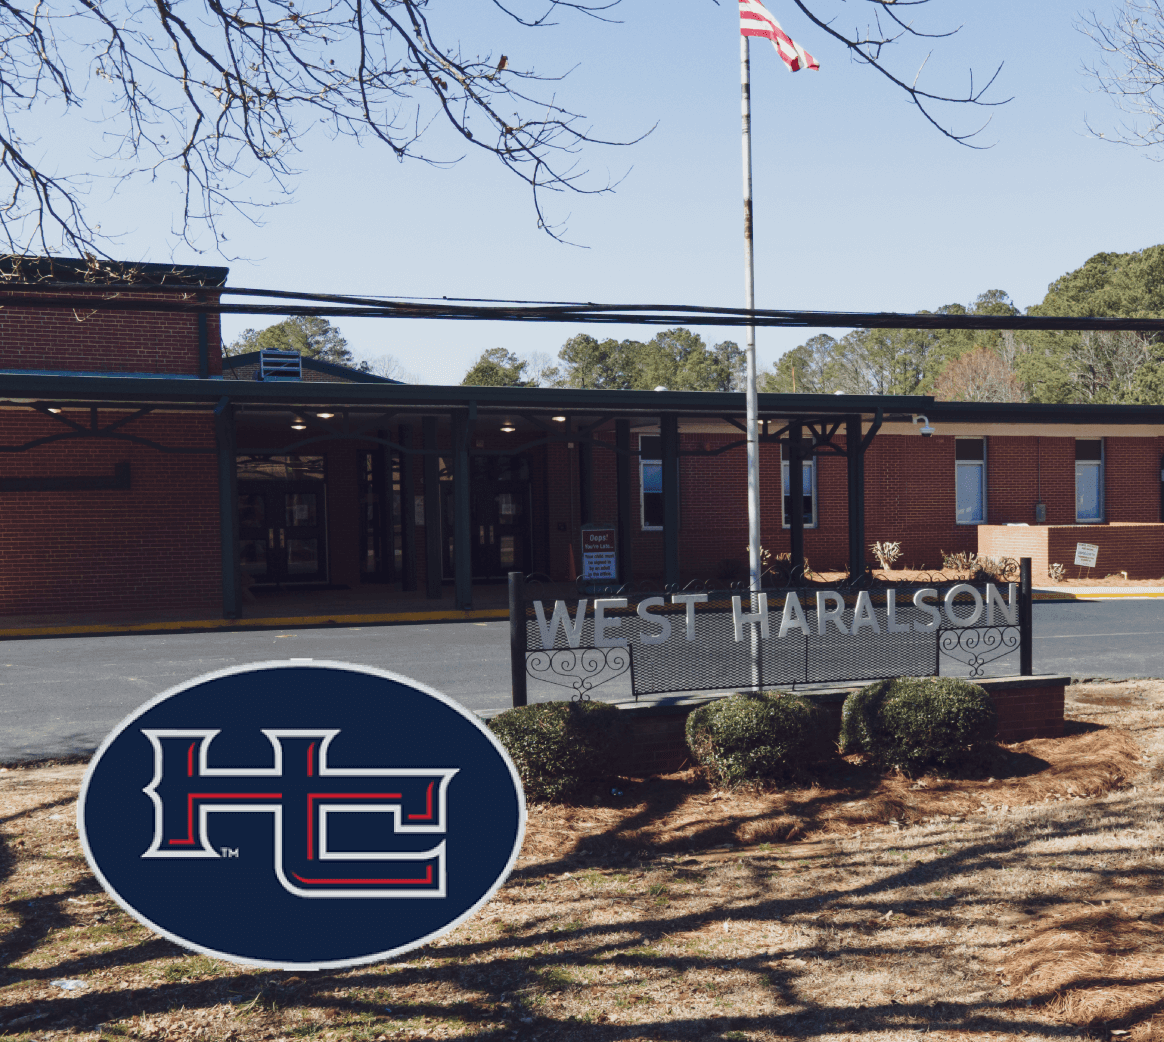 A picture of the outside of West Haralson Elementary School in Haralson County, Georgia with the school logo.